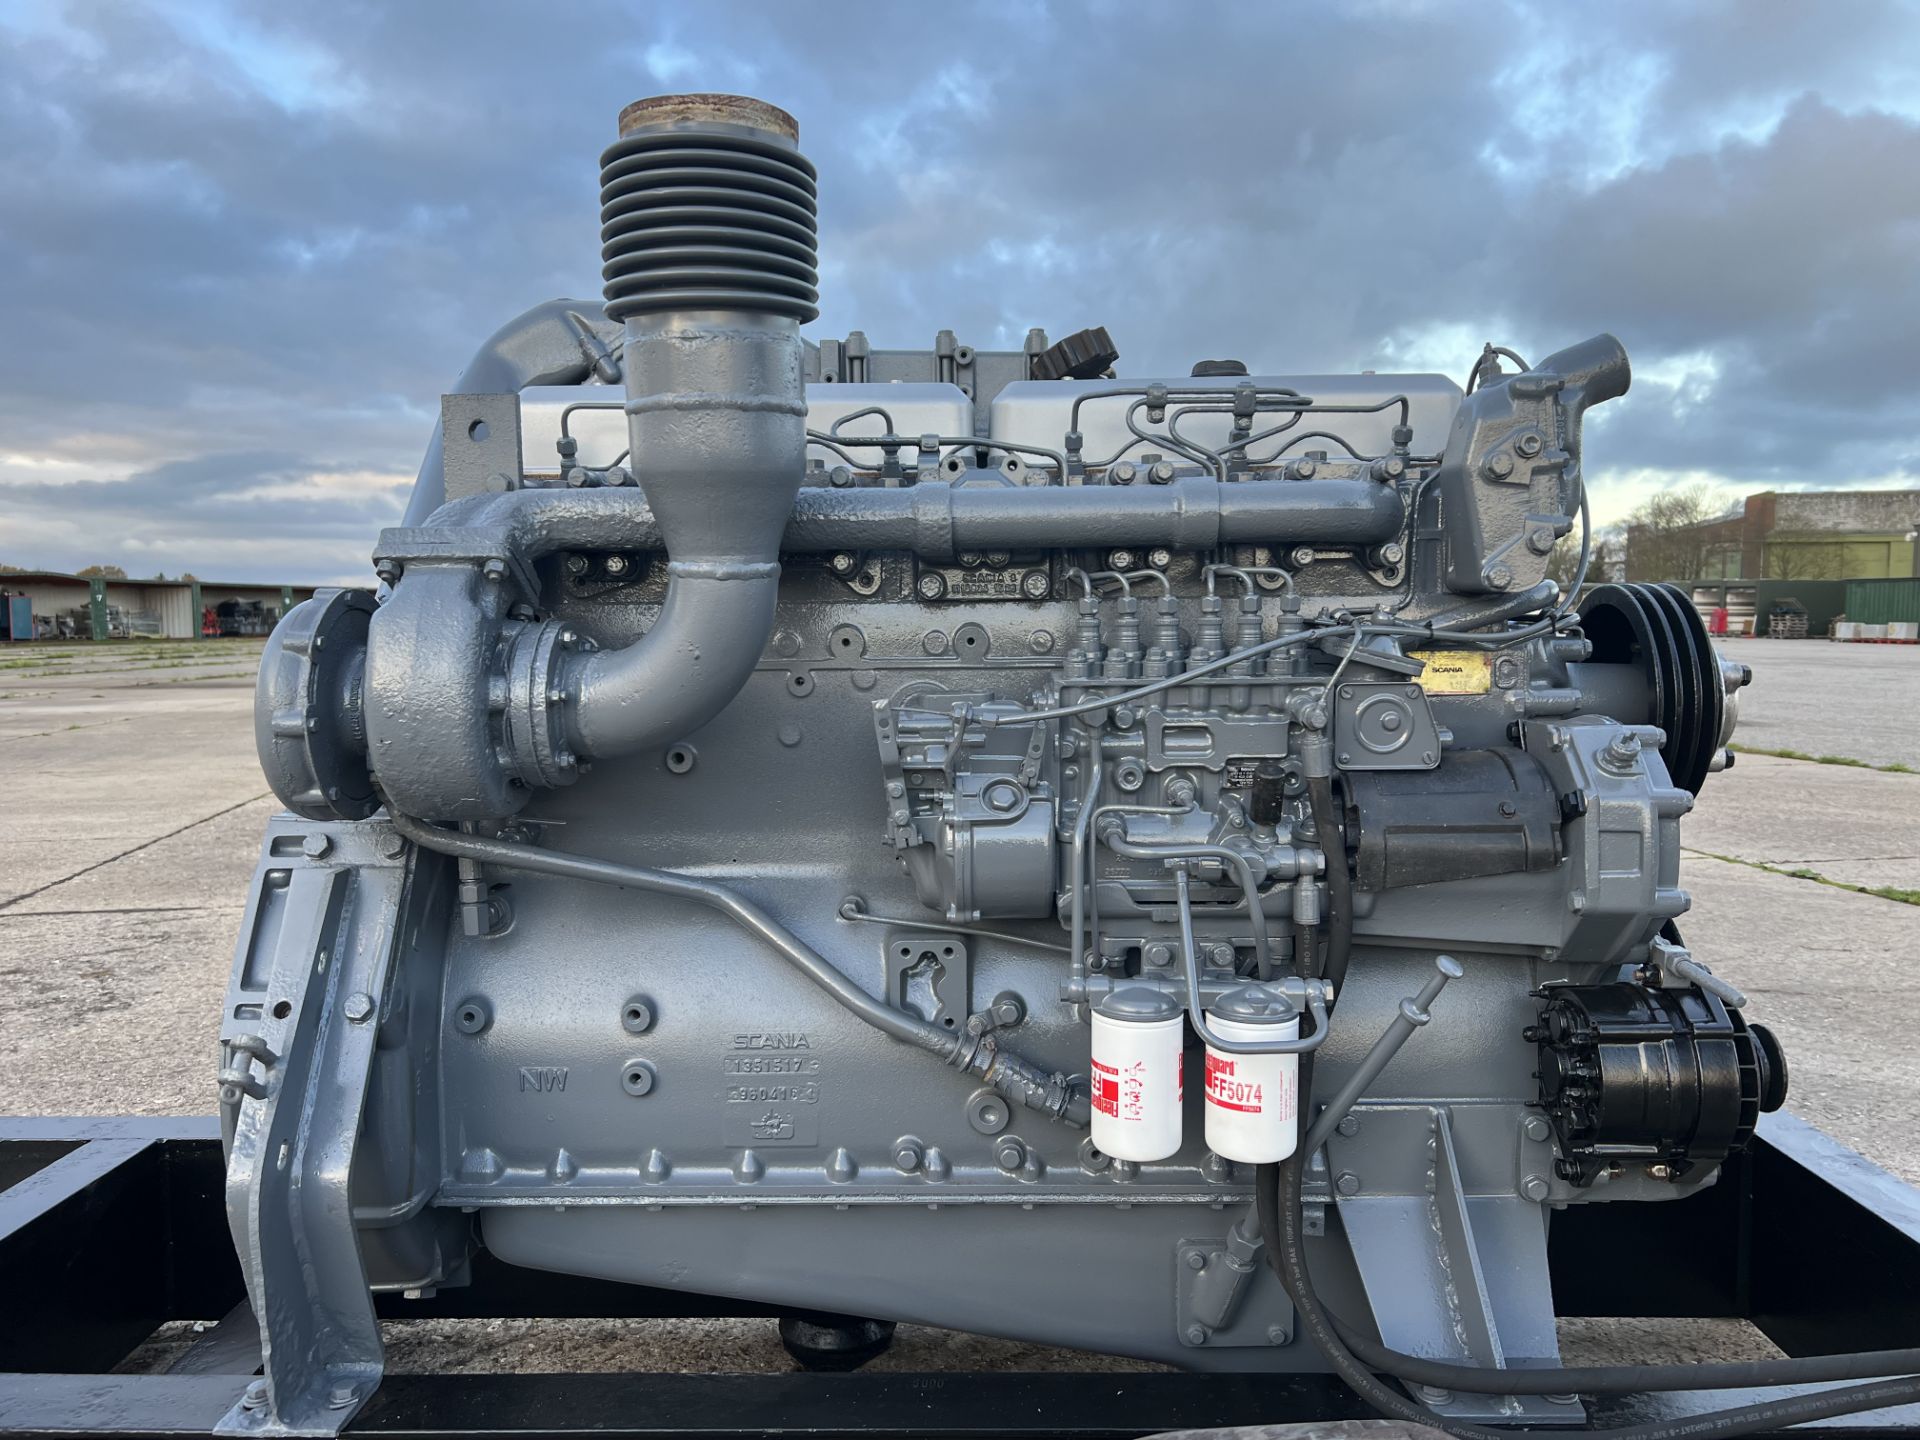 Scania Ds11 62Diesel Engine: Test hours